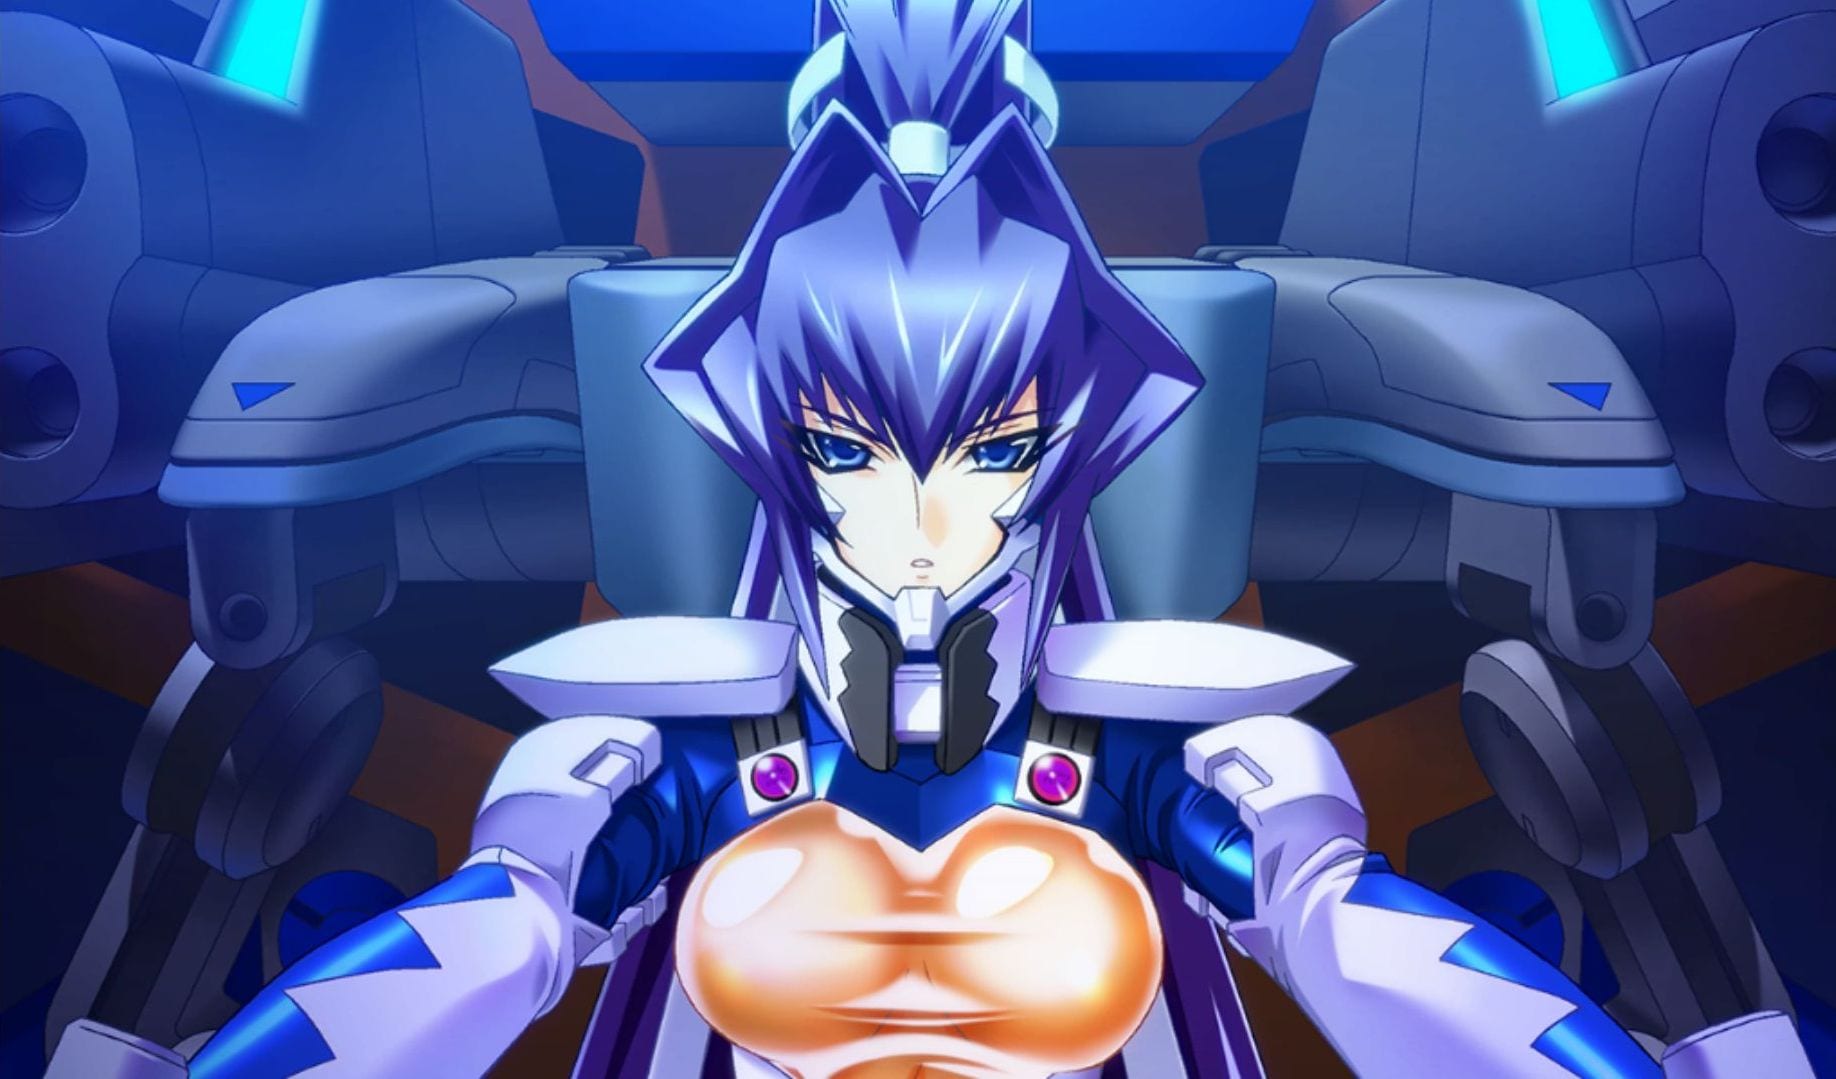 Muv-Luv Unlimited